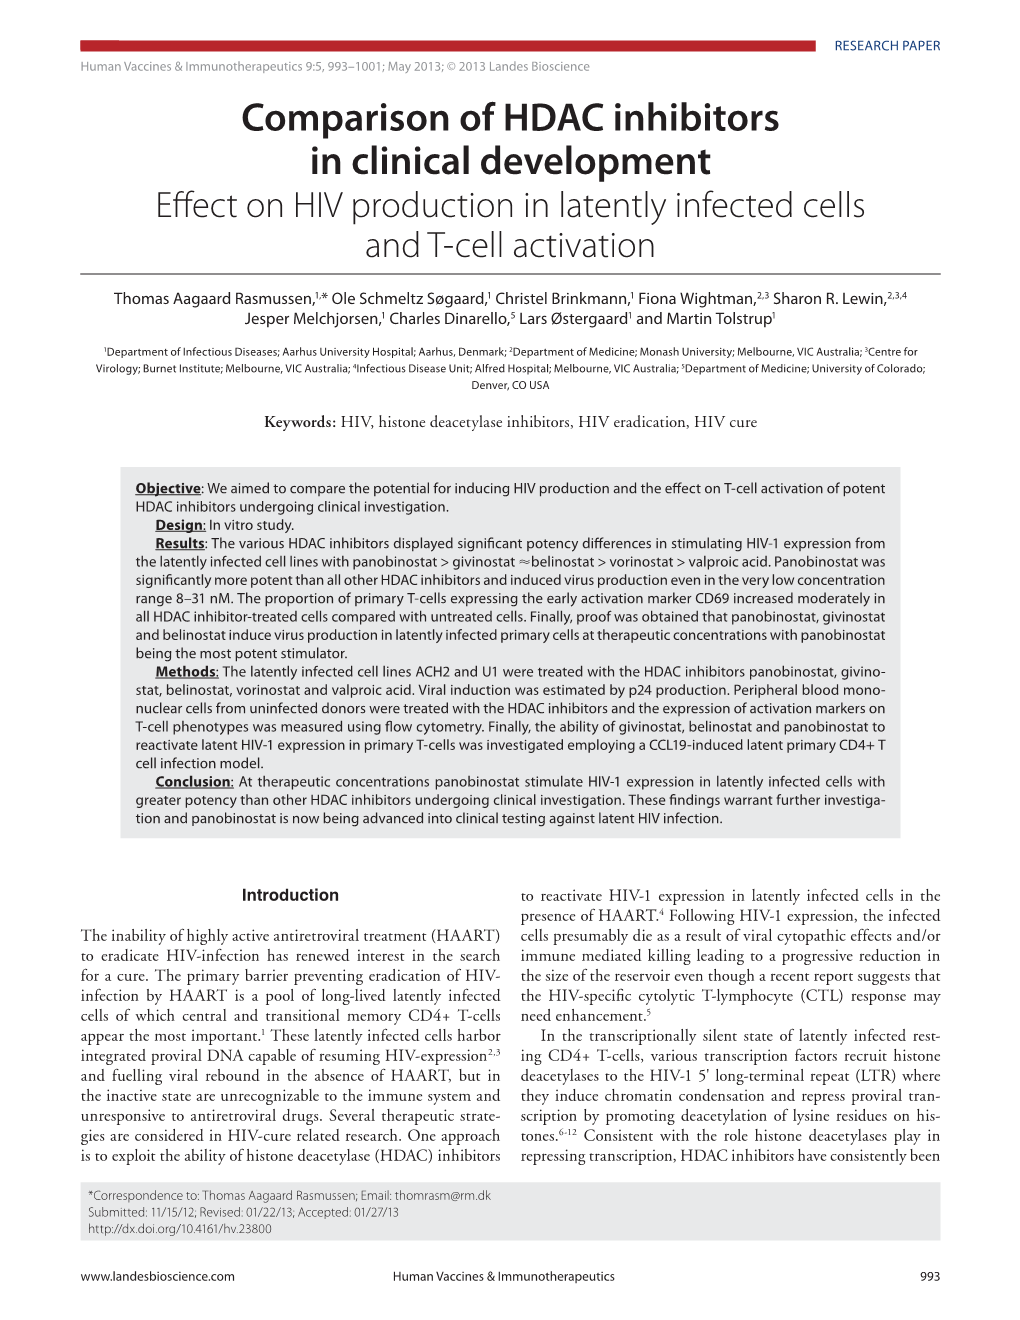 Comparison of HDAC Inhibitors in Clinical Development Effect on HIV Production in Latently Infected Cells and T-Cell Activation